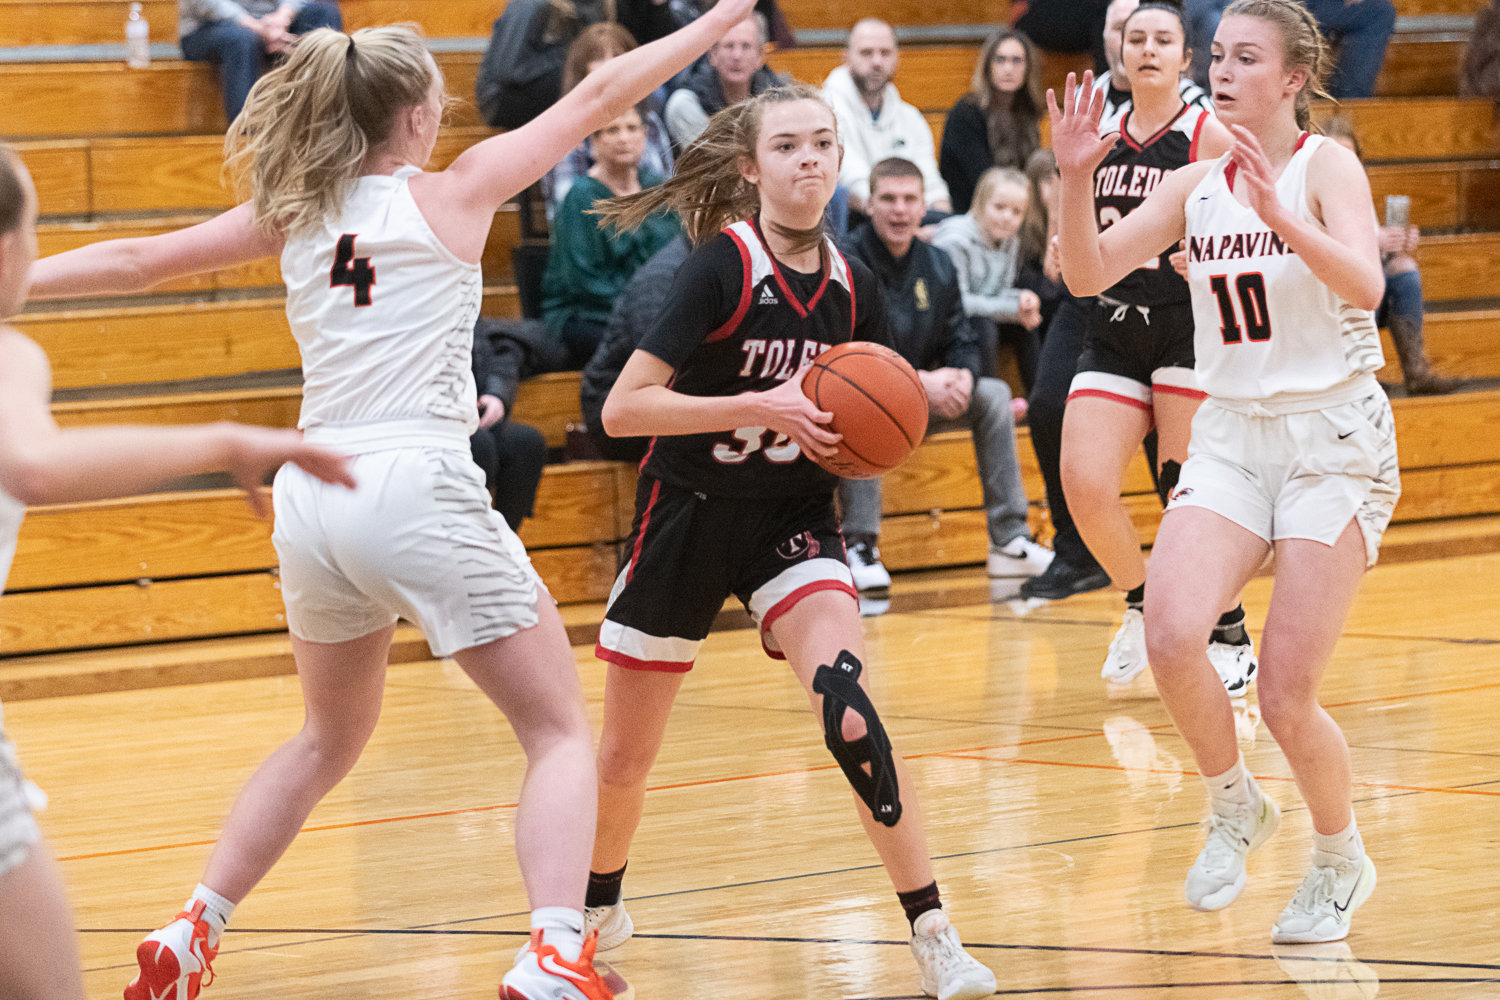 Ryah Stanley looks for a teammate to pass to during the first half of Toledo's loss at Napavine on Dec. 14.